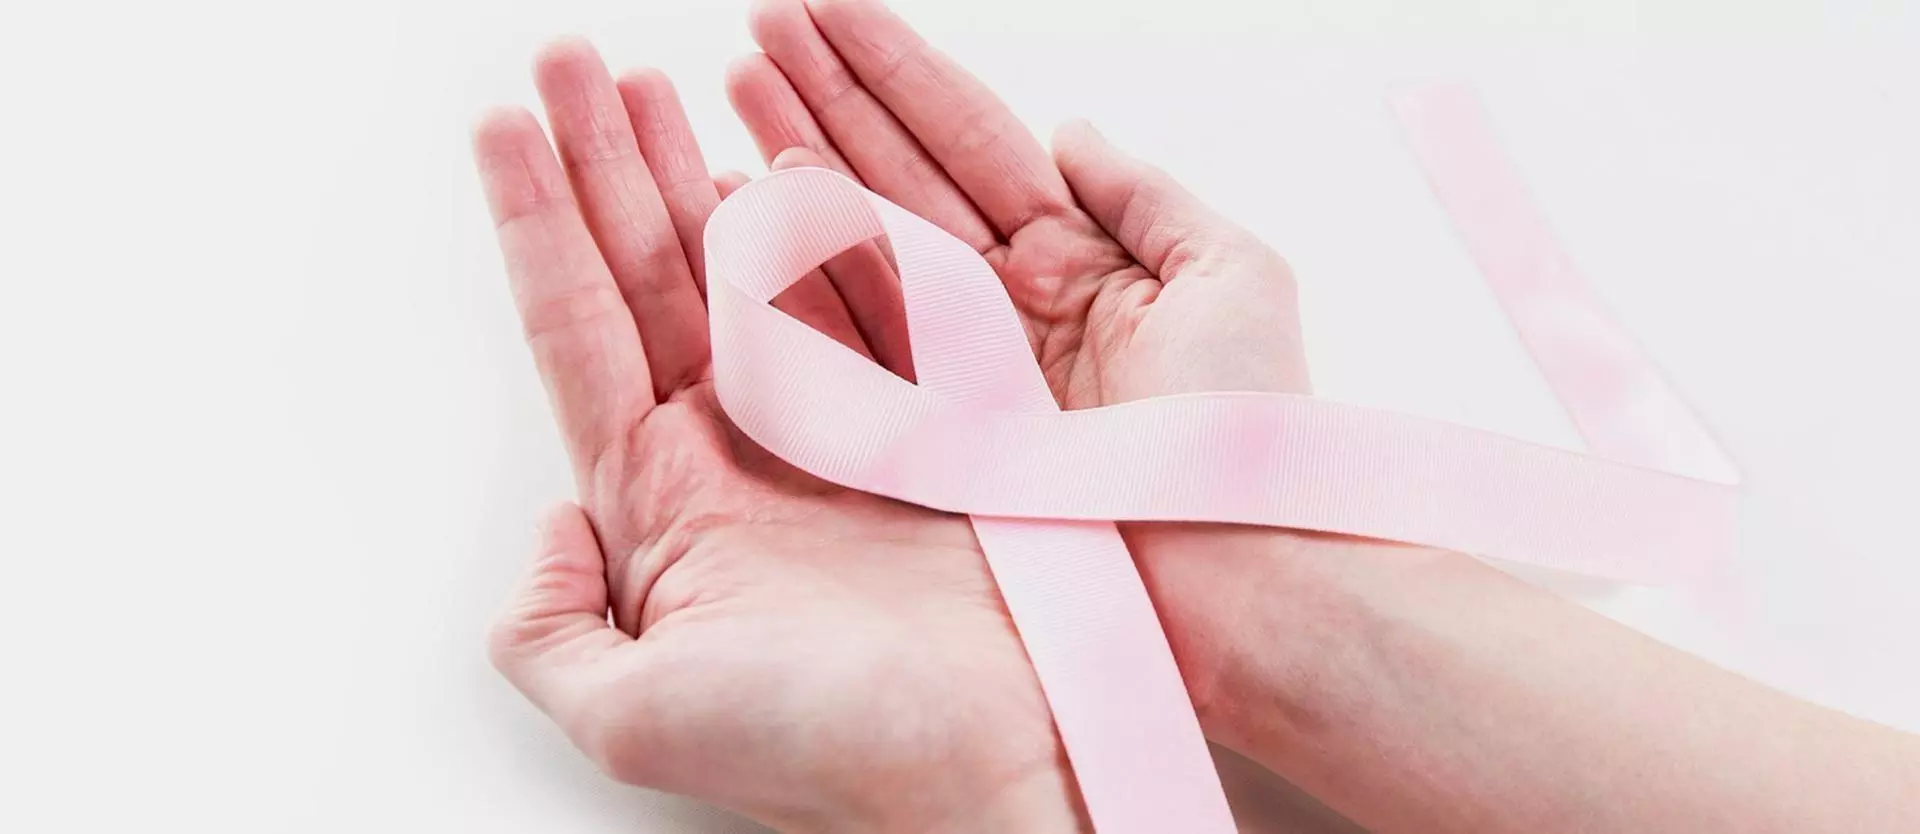 October is Breast Cancer Awareness Month – The Importance of Getting a Yearly Screening